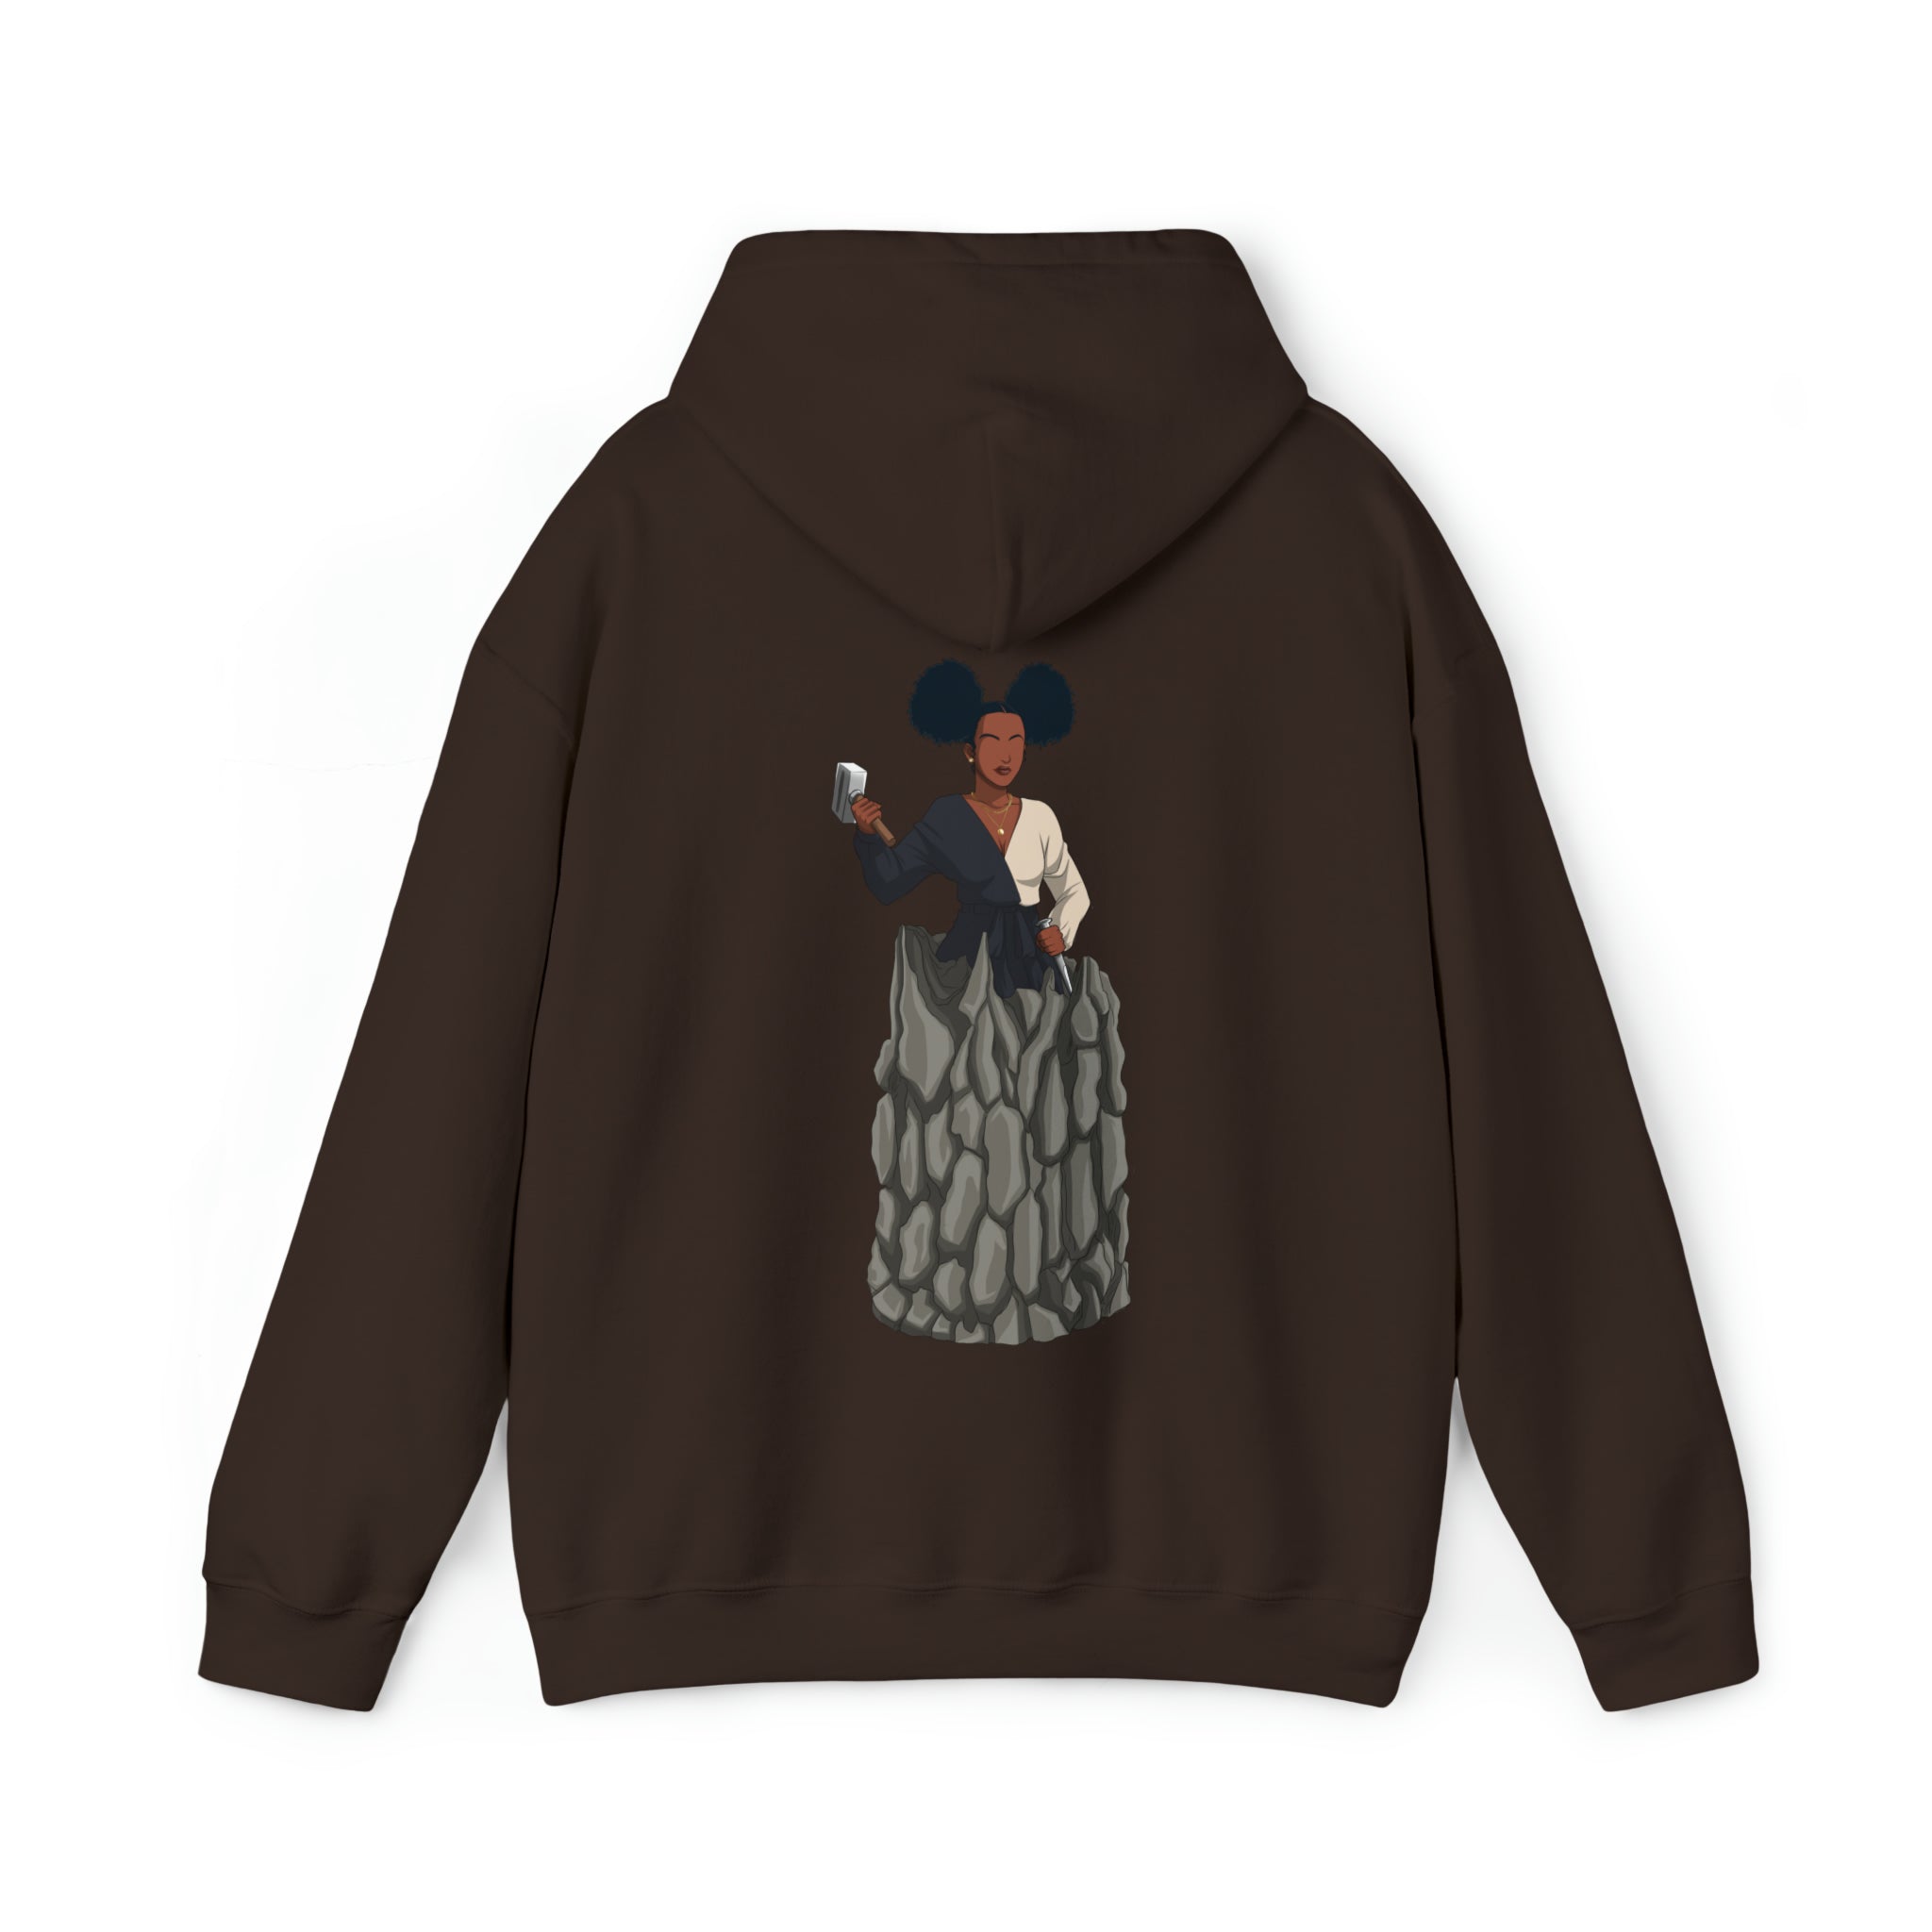 A person working hard to better his/herself - Heavy Blend™ Self-Made Hoodie - woman #10 - Breakthrough Collection